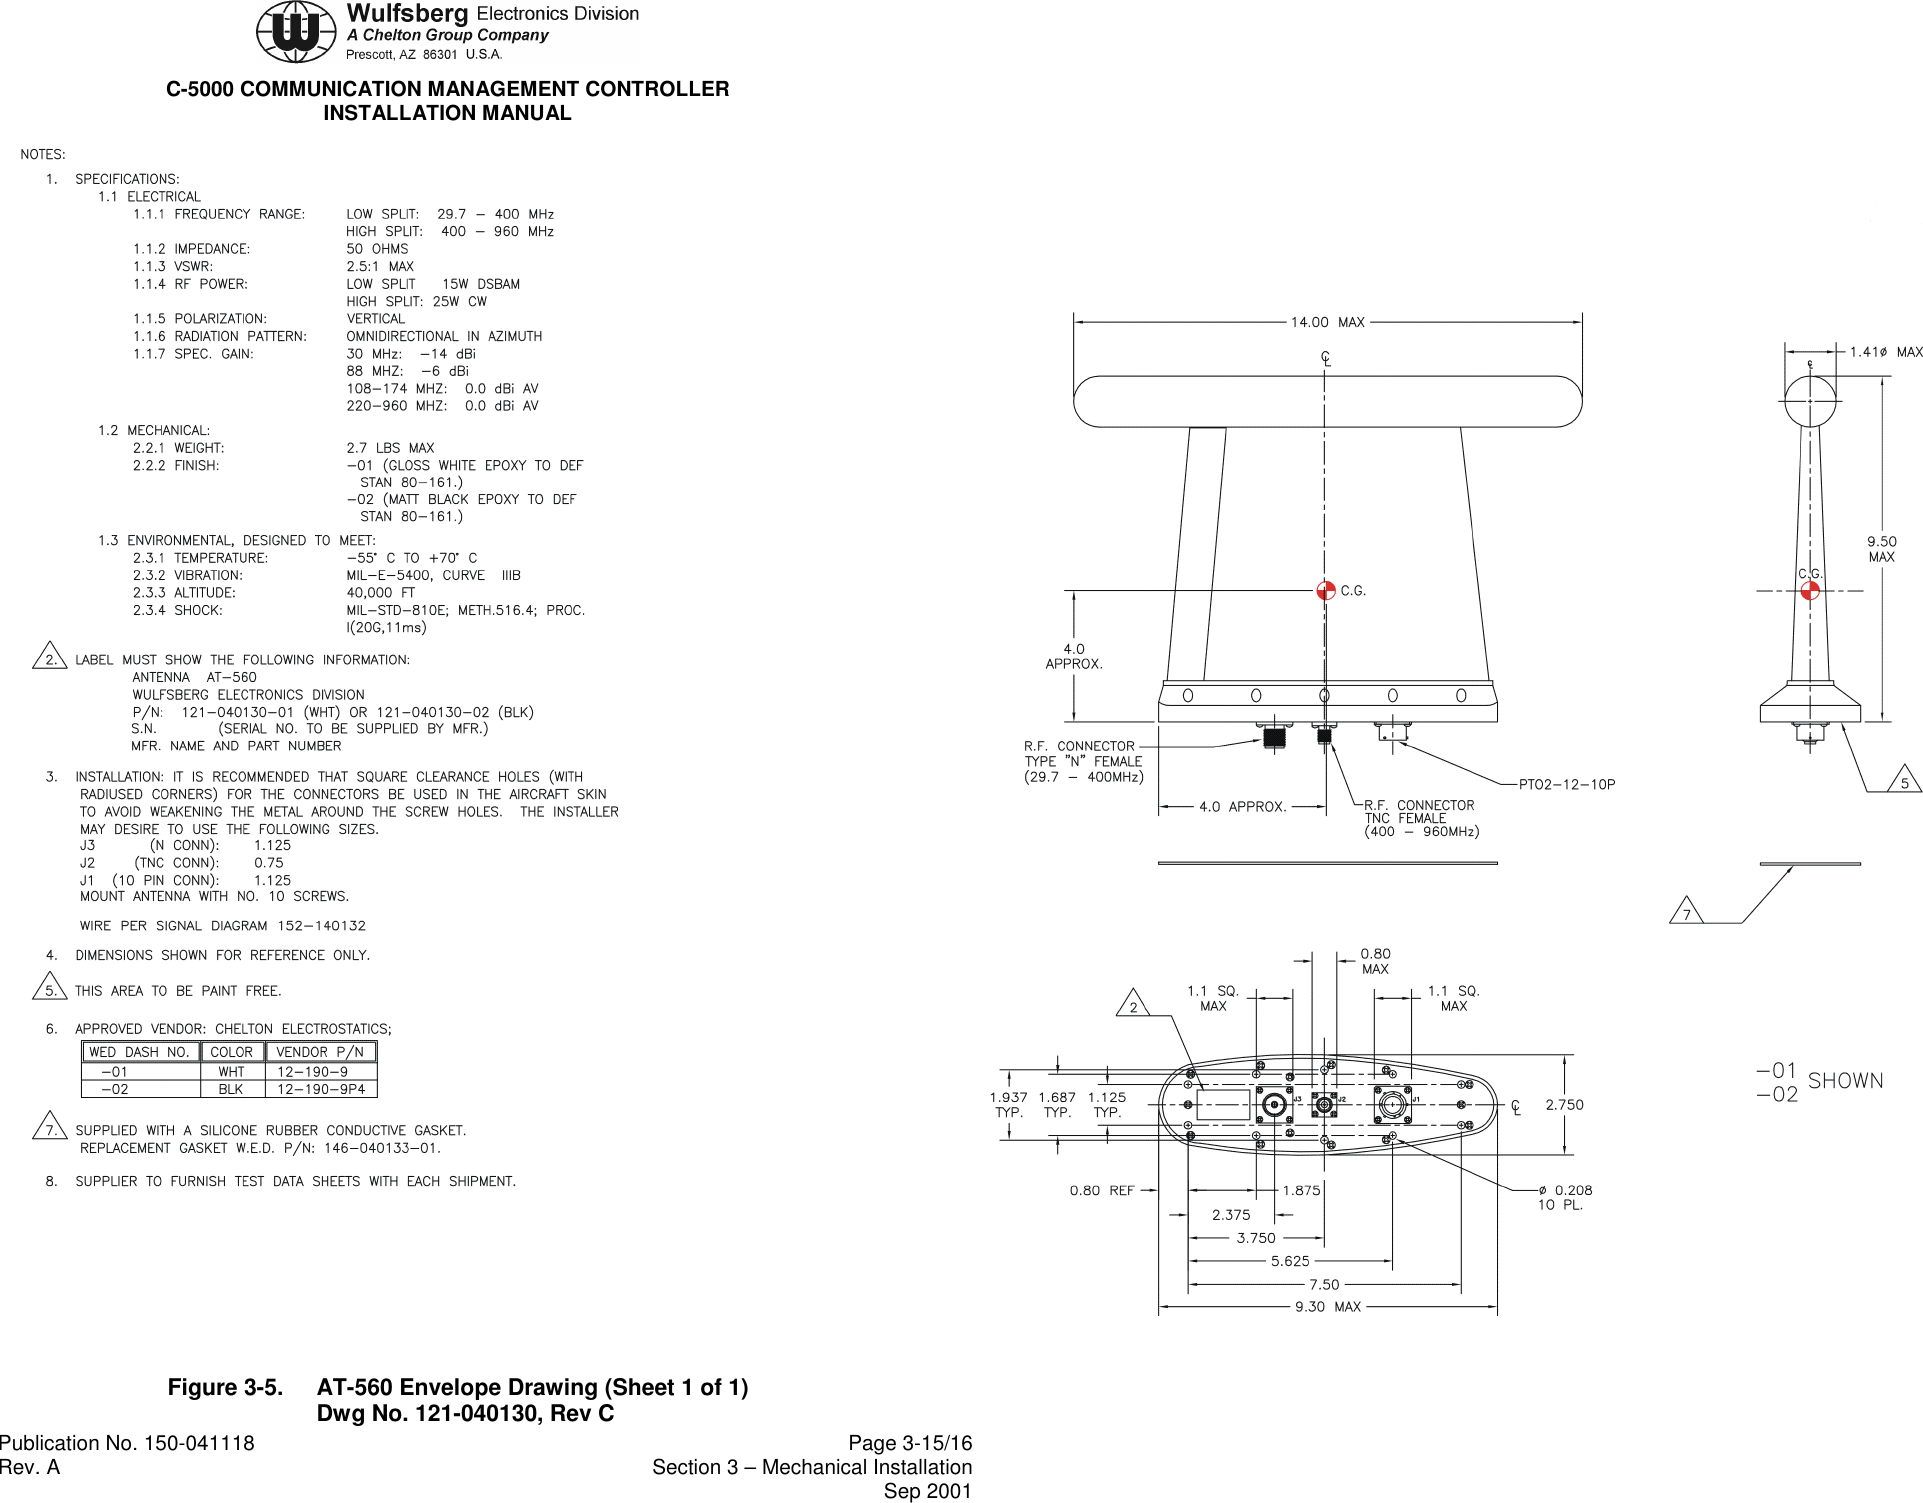 C-5000 COMMUNICATION MANAGEMENT CONTROLLERINSTALLATION MANUALPublication No. 150-041118 Page 3-15/16Rev. A Section 3 – Mechanical InstallationSep 2001Figure 3-5. AT-560 Envelope Drawing (Sheet 1 of 1)Dwg No. 121-040130, Rev C